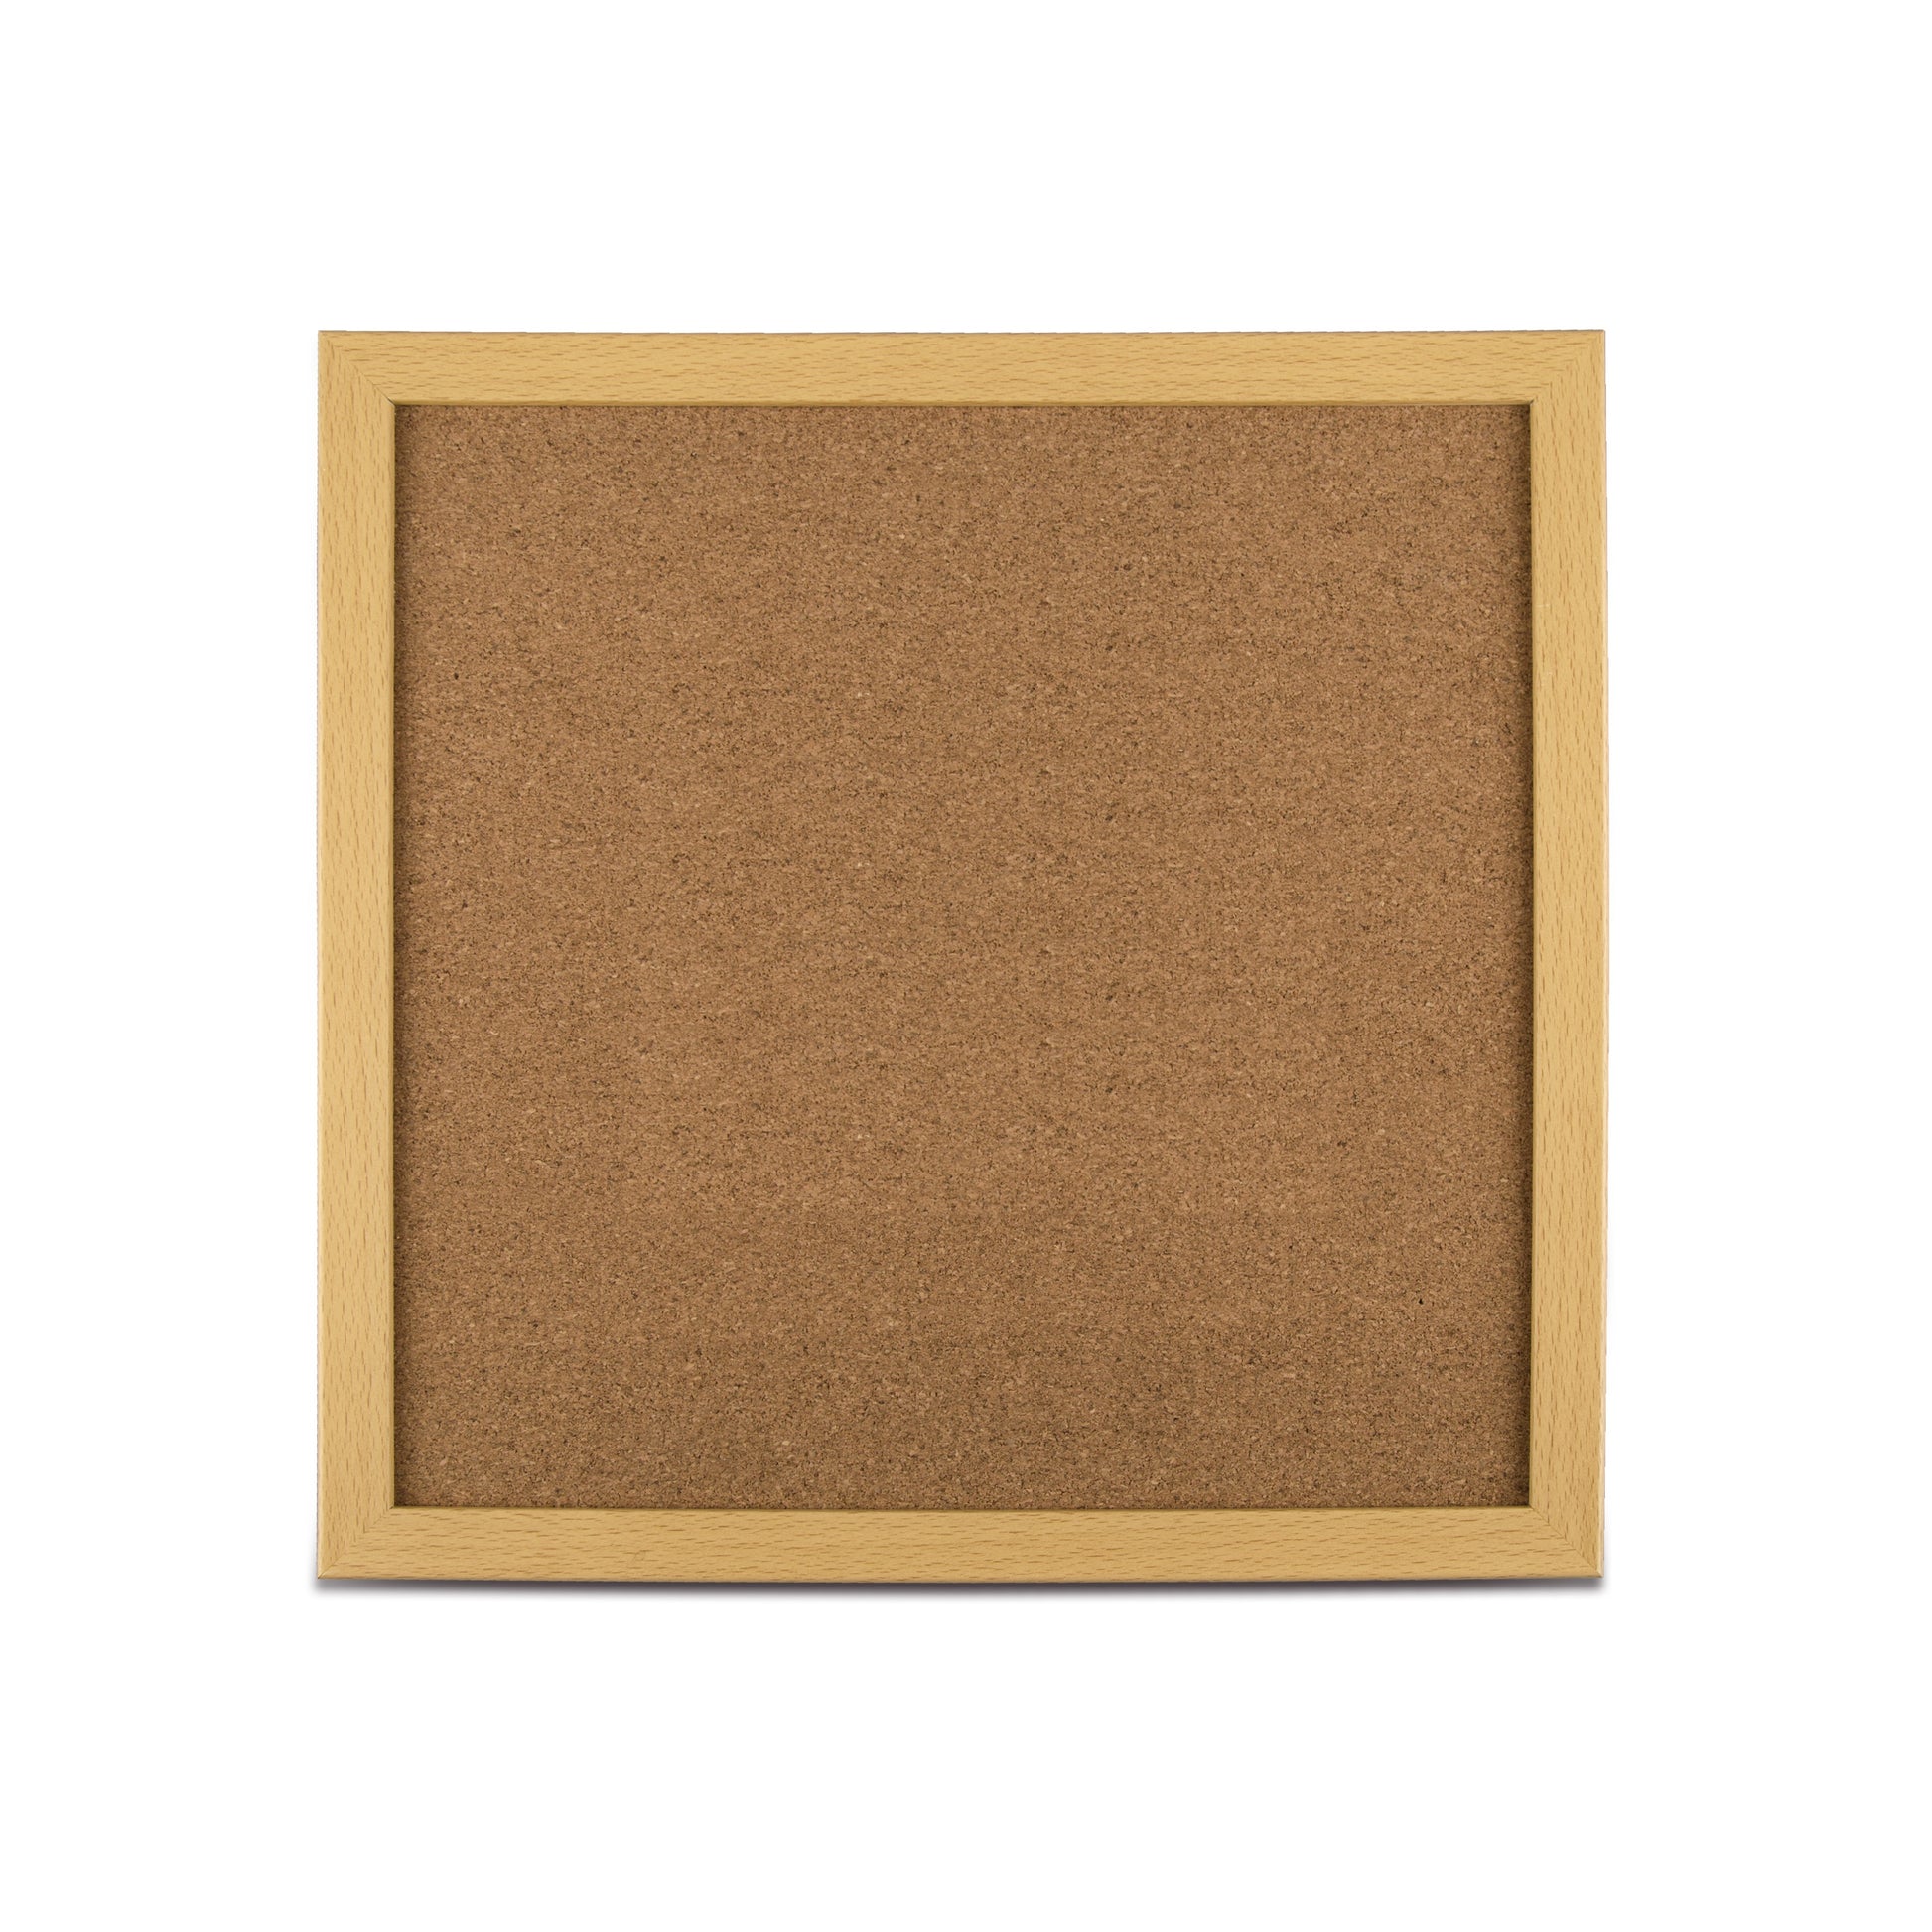 M10 Square Combo Wall Mounted Cork Bulletin Board with Plastic Frame, OEM ODM - Premium cork bulletin board from Madic Whiteboard Factory - Madic Whiteboard Factory